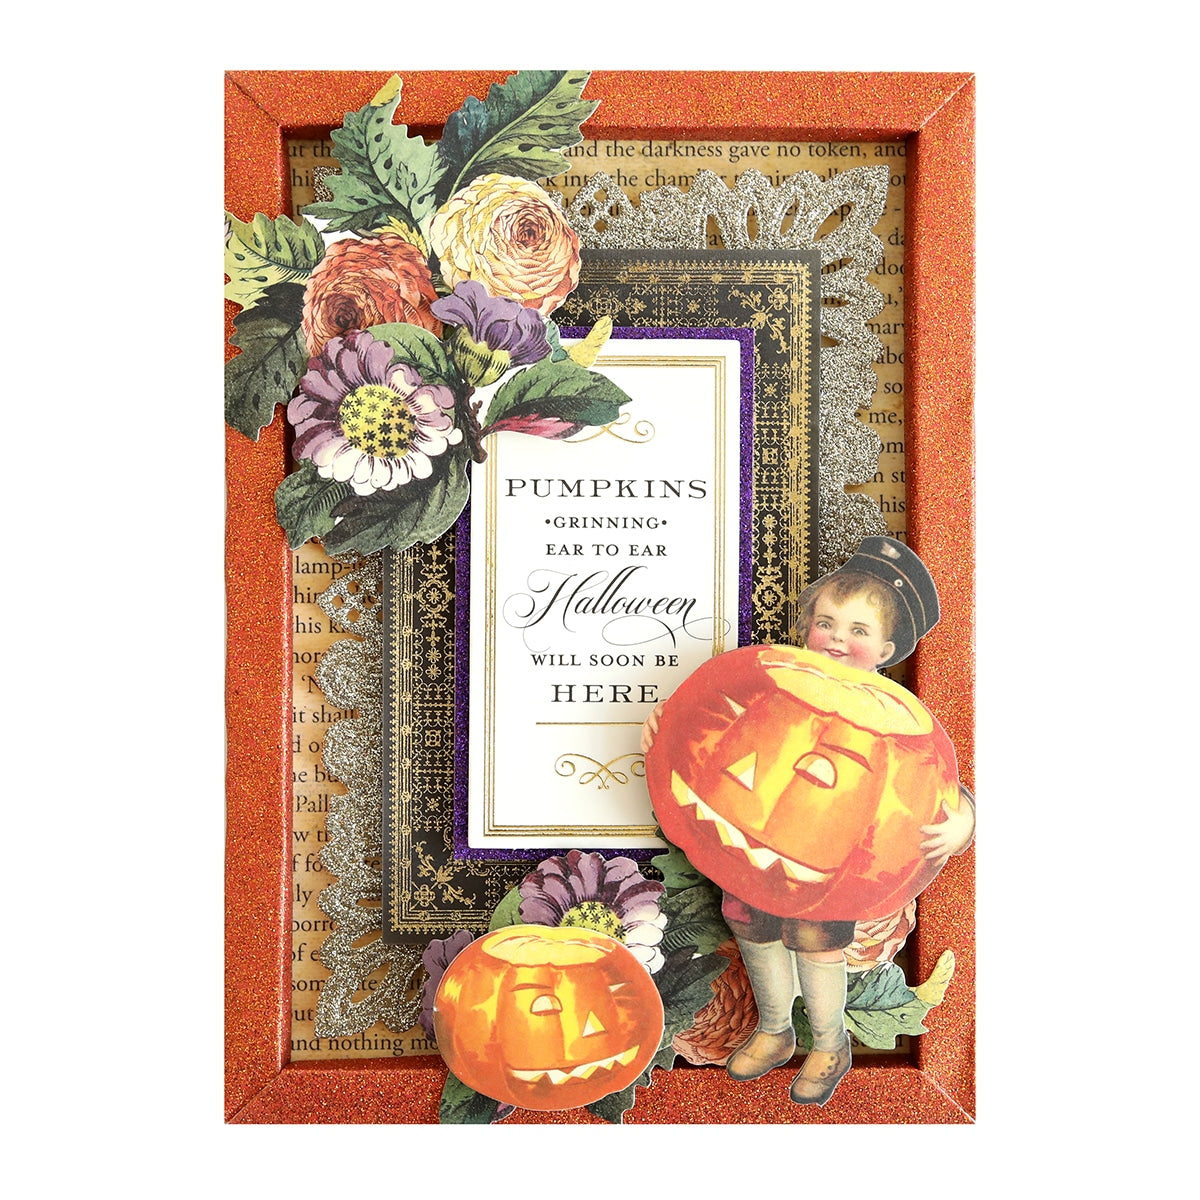 A Halloween 12x12 Glitter Cardstock with a boy holding a pumpkin and flowers.